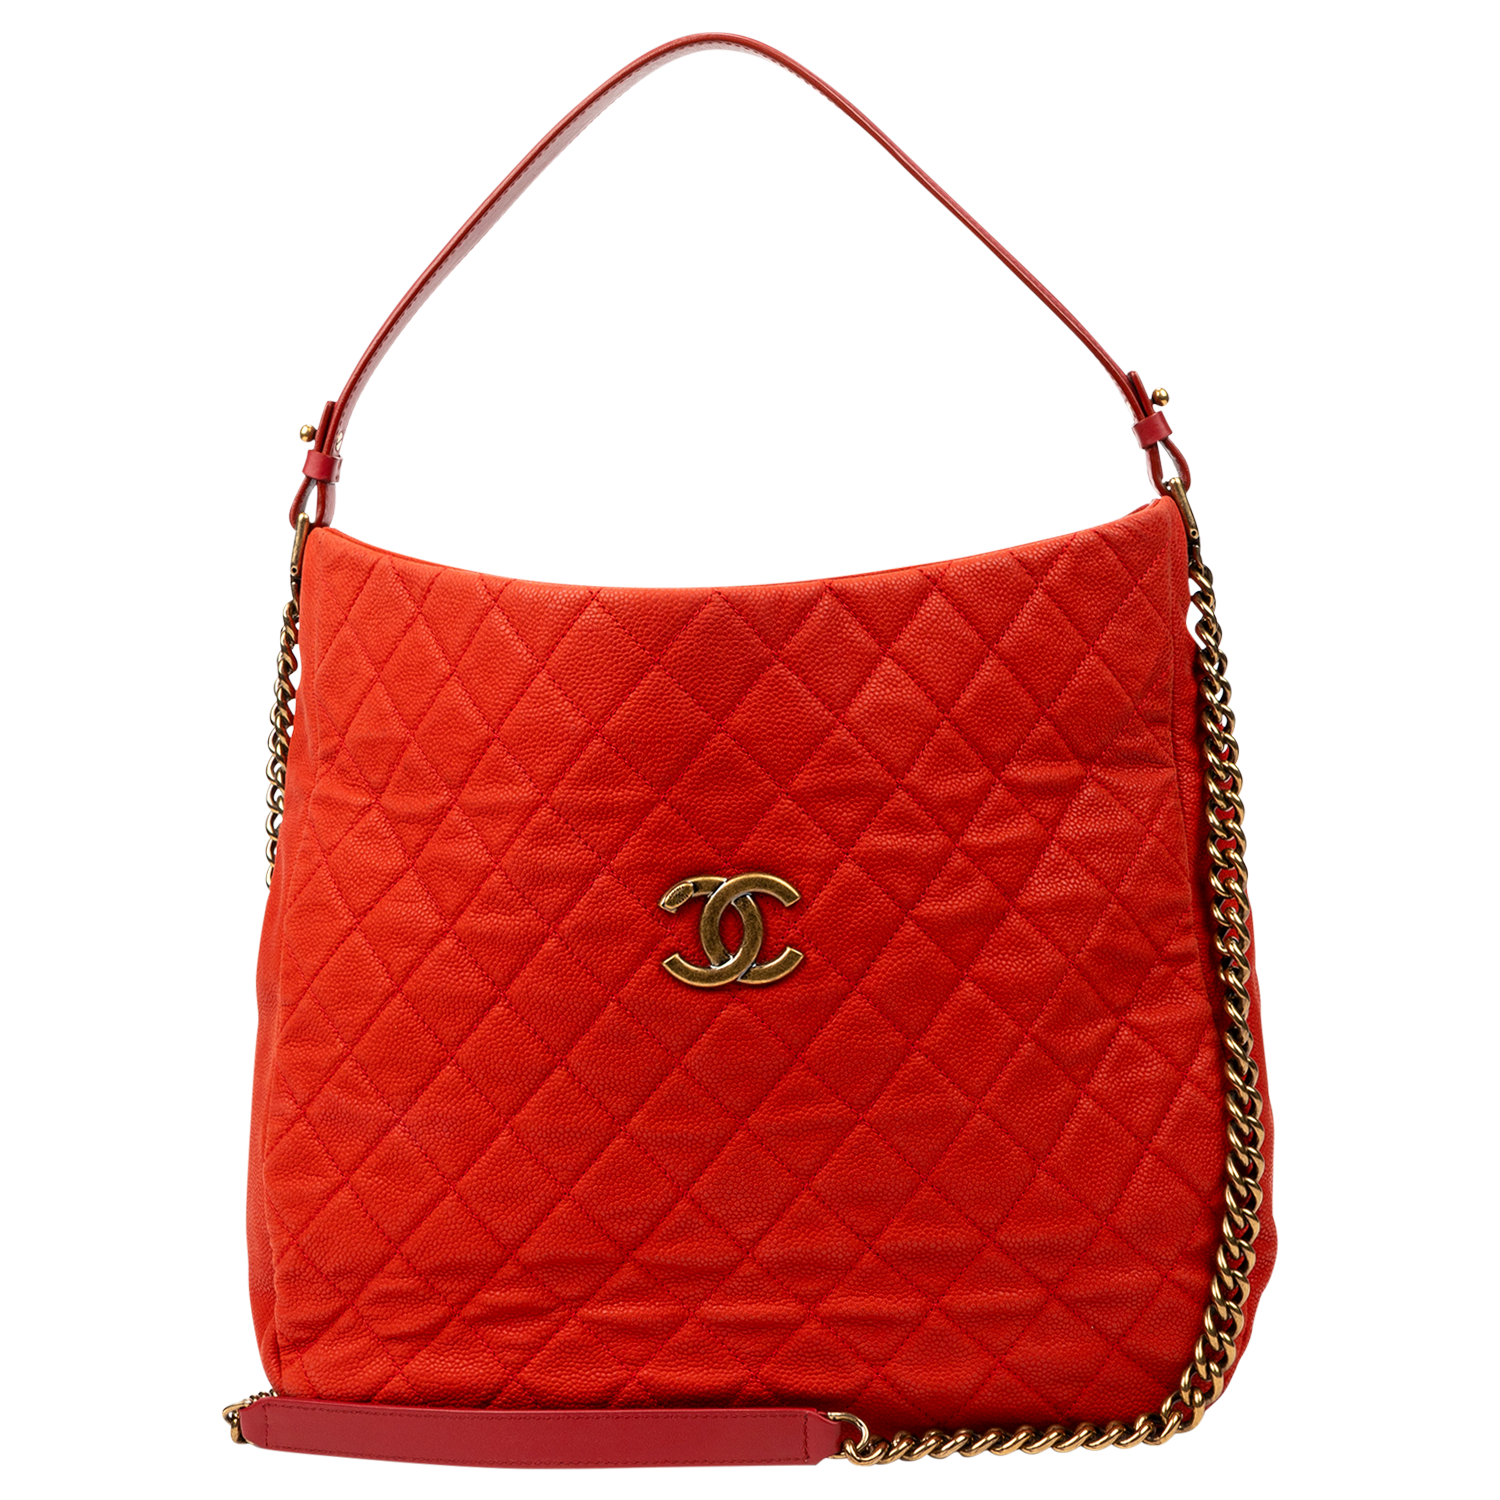 Chanel 2013 Cruise Collection Red Caviar Shopper